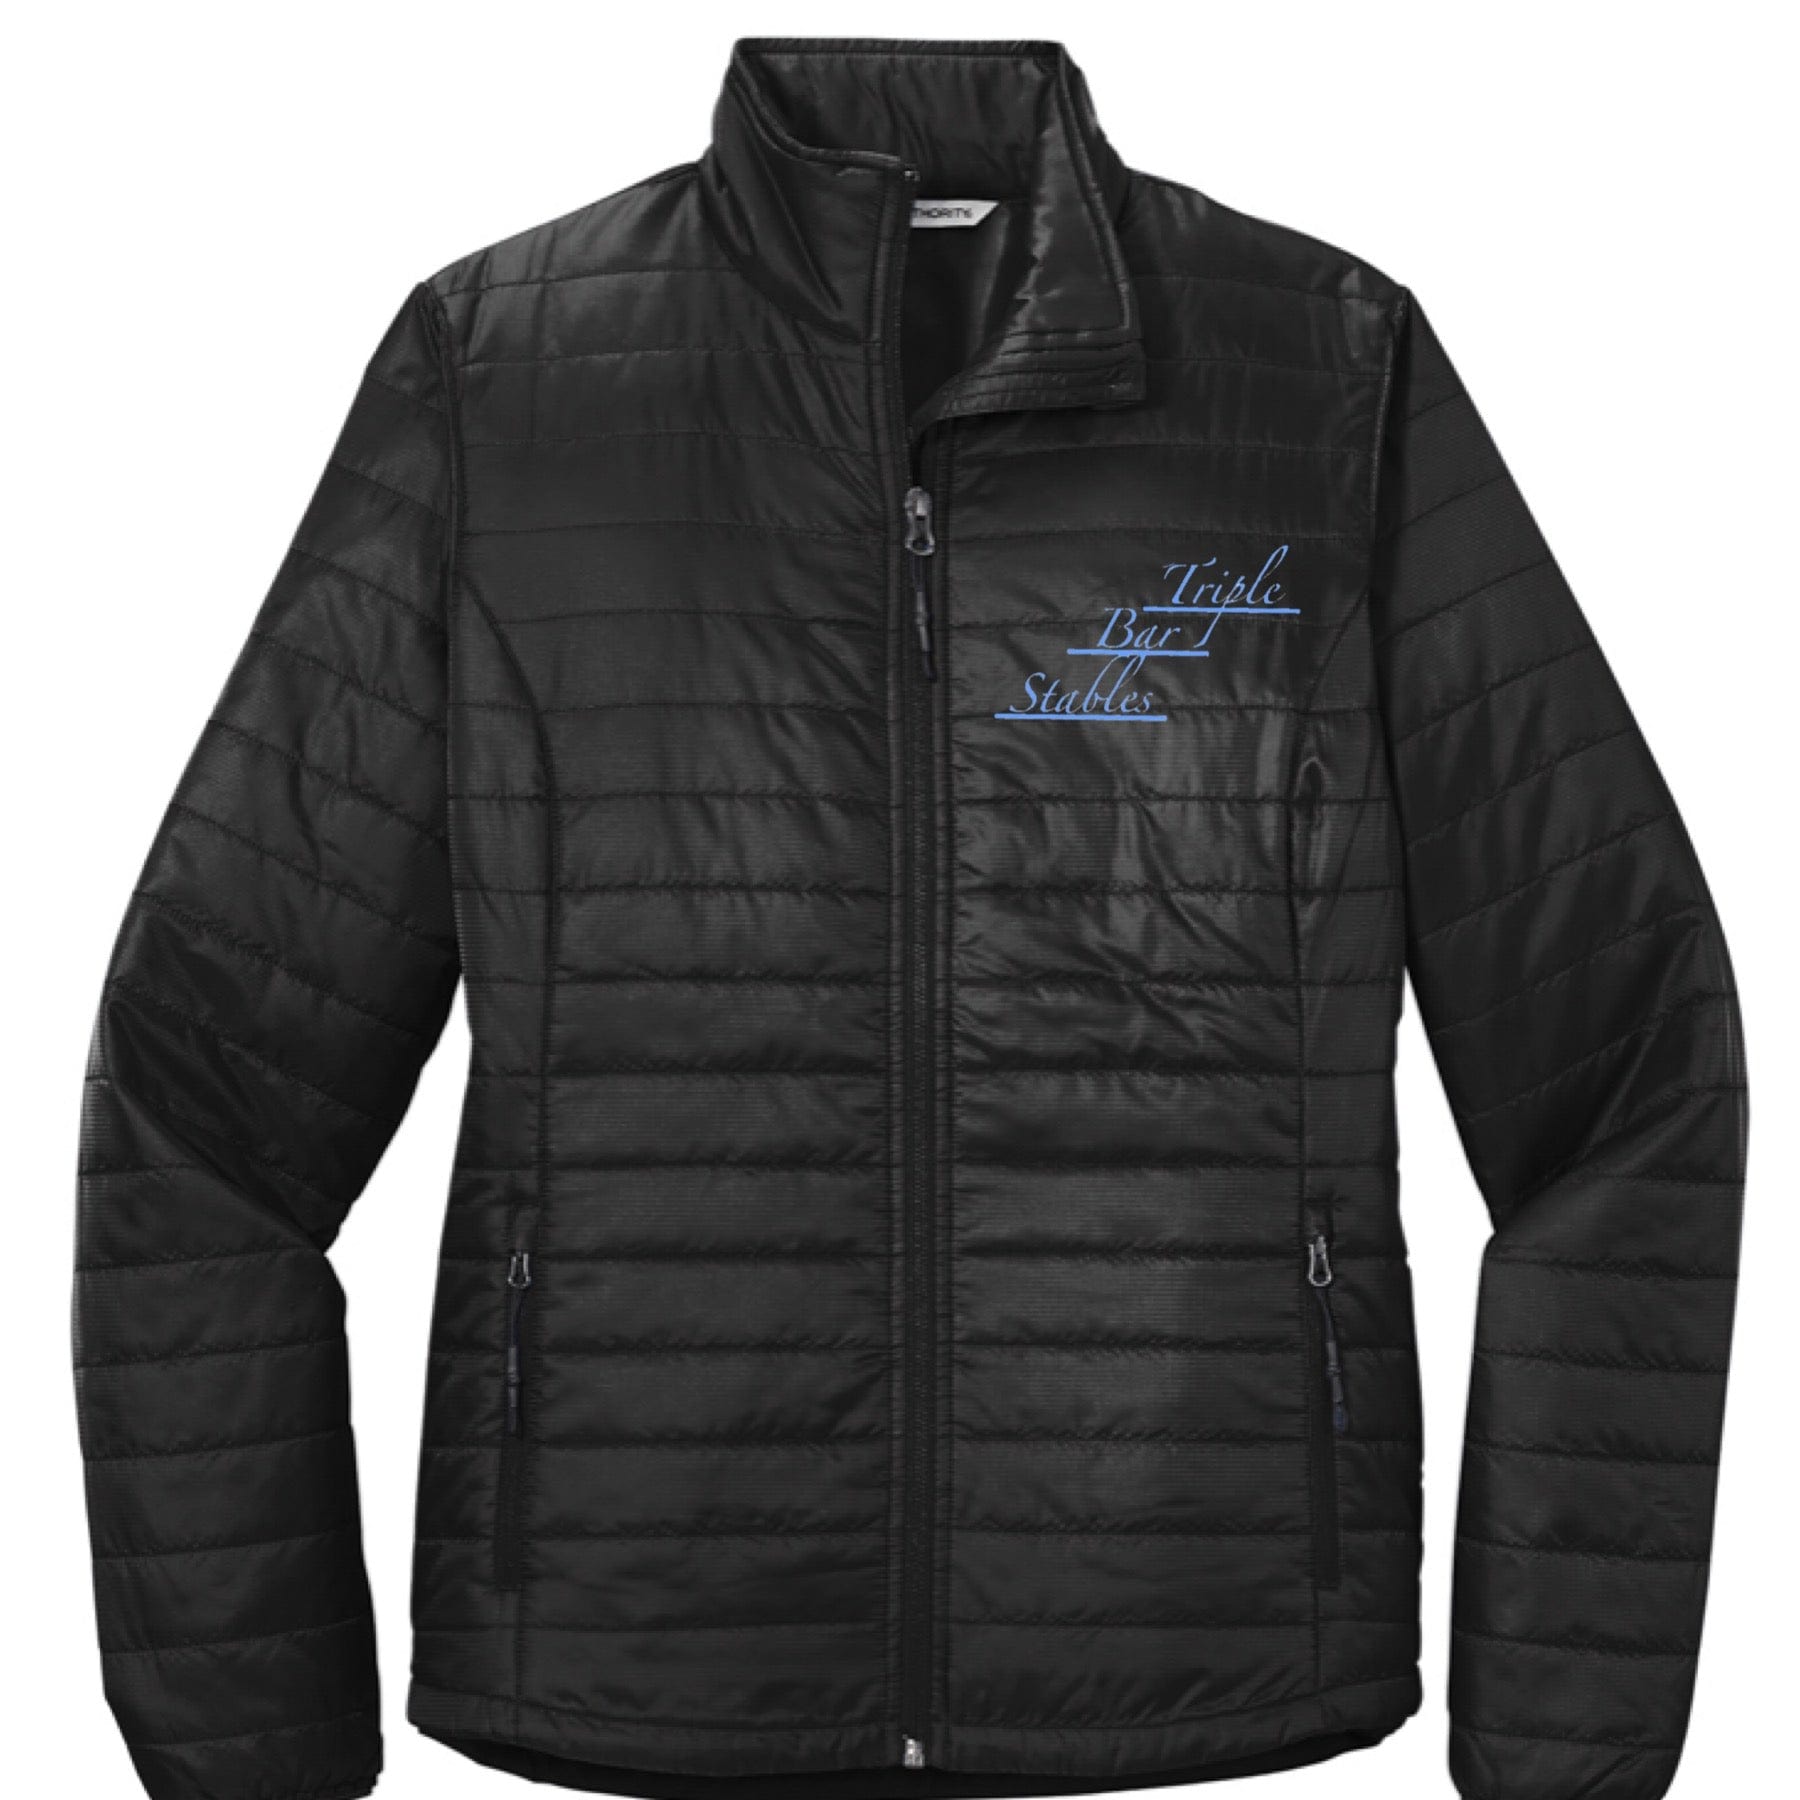 Equestrian Team Apparel Triple Bar Stables Puffy Jacket equestrian team apparel online tack store mobile tack store custom farm apparel custom show stable clothing equestrian lifestyle horse show clothing riding clothes horses equestrian tack store